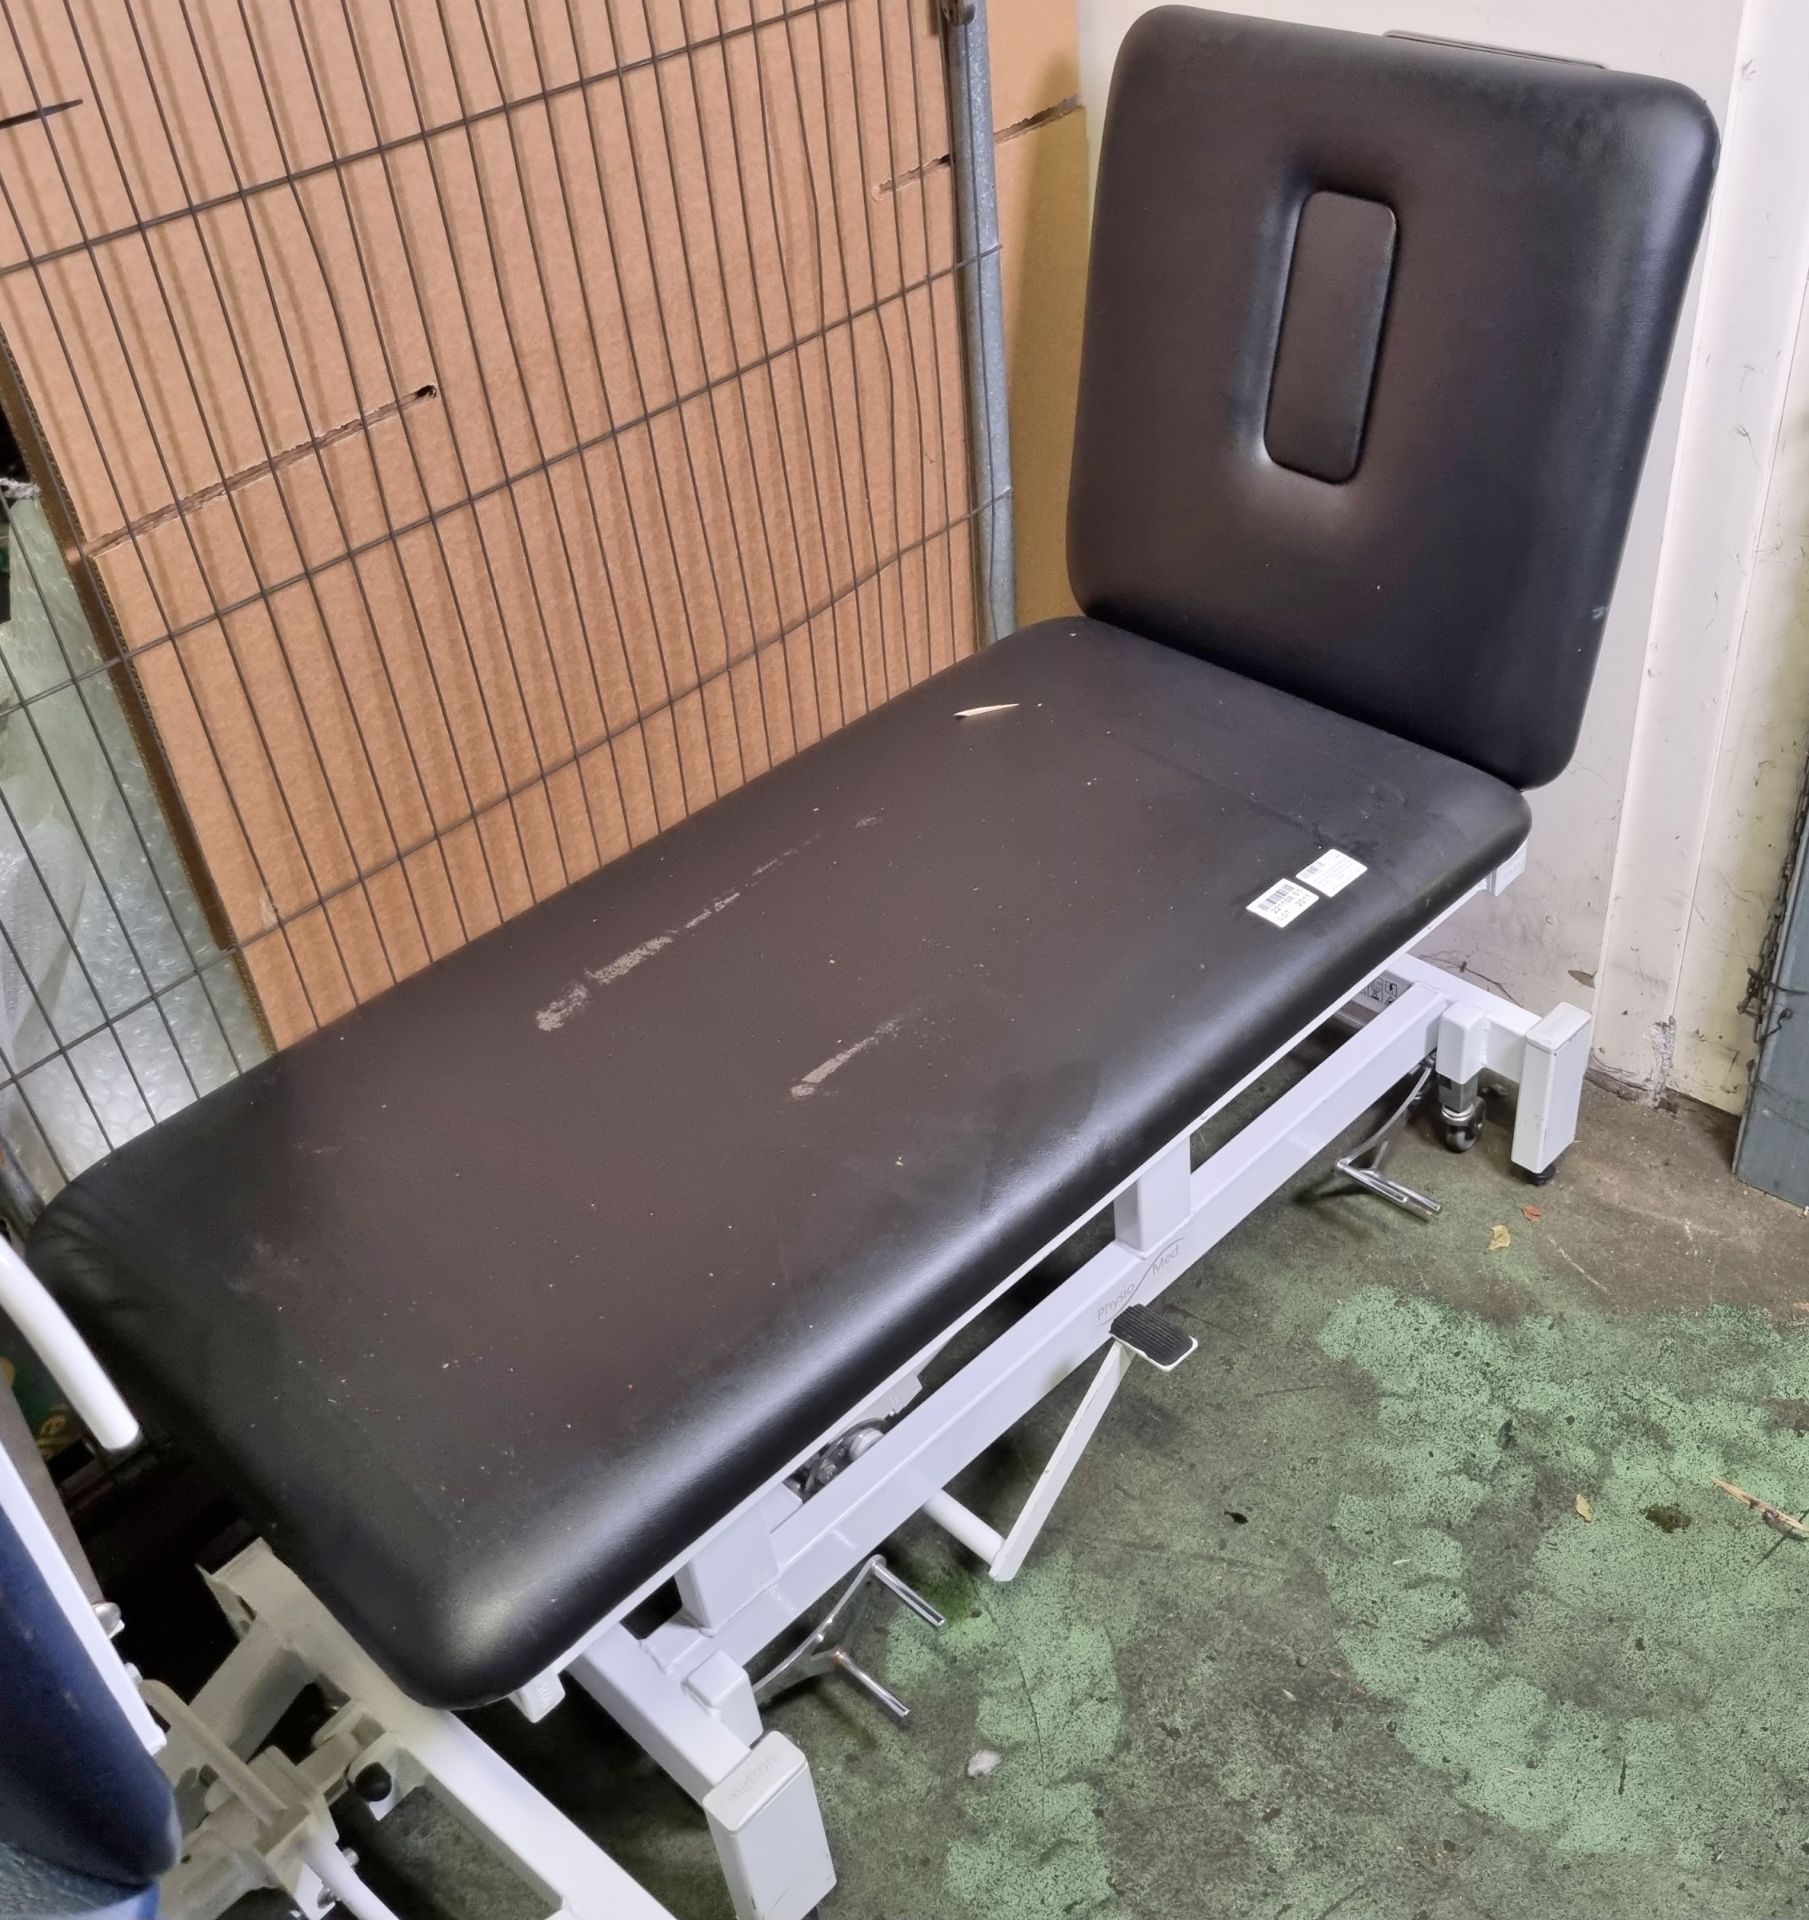 Metron Physio Med Massage Table - Height adjustable foot control - L1660mm fully laid down - Image 2 of 2